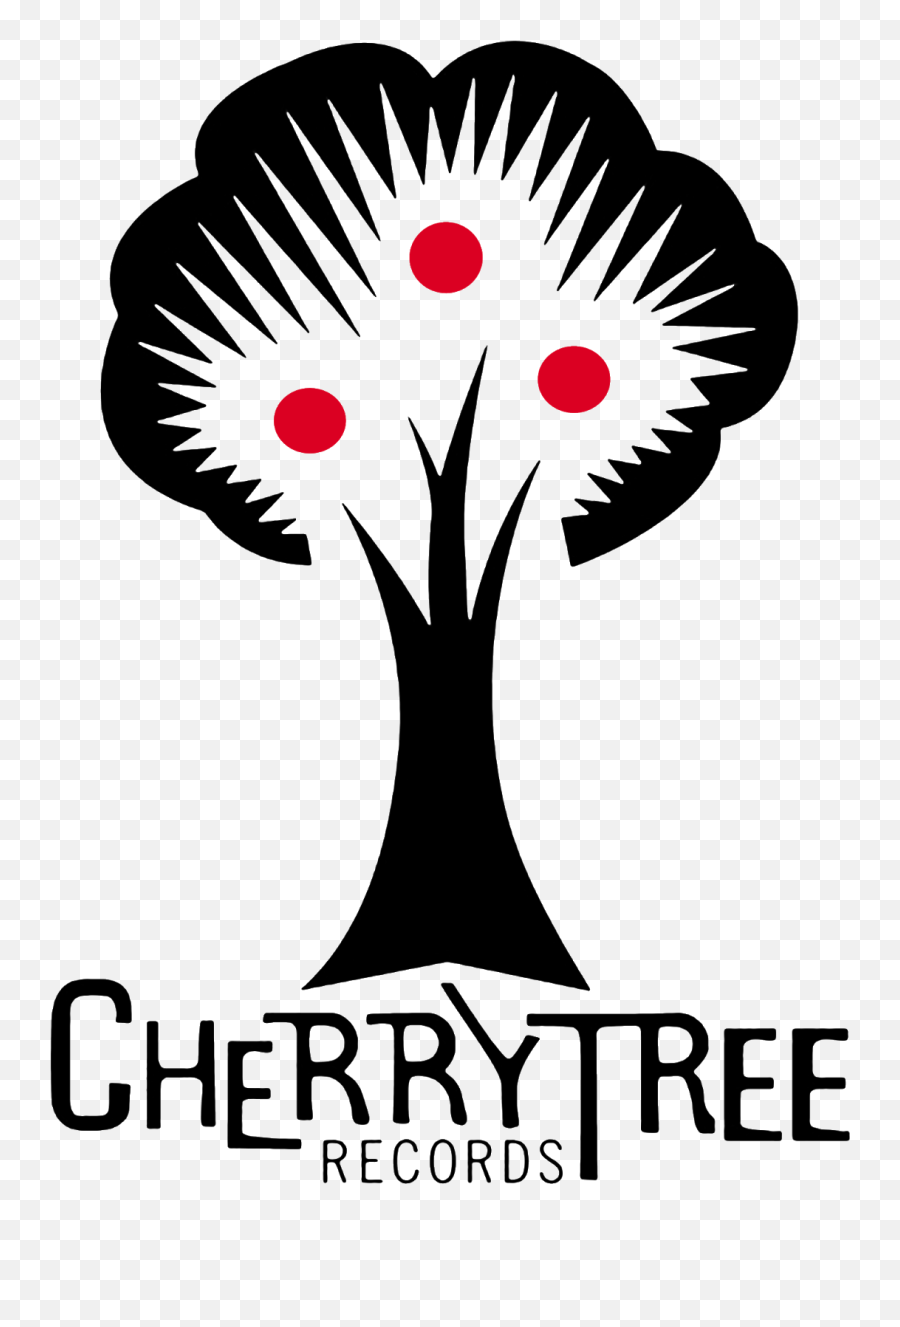 Lady Gaga Fanmade Covers Cherry Tree Records - Logo Cherrytree Records Logo Png Emoji,Tree Logos